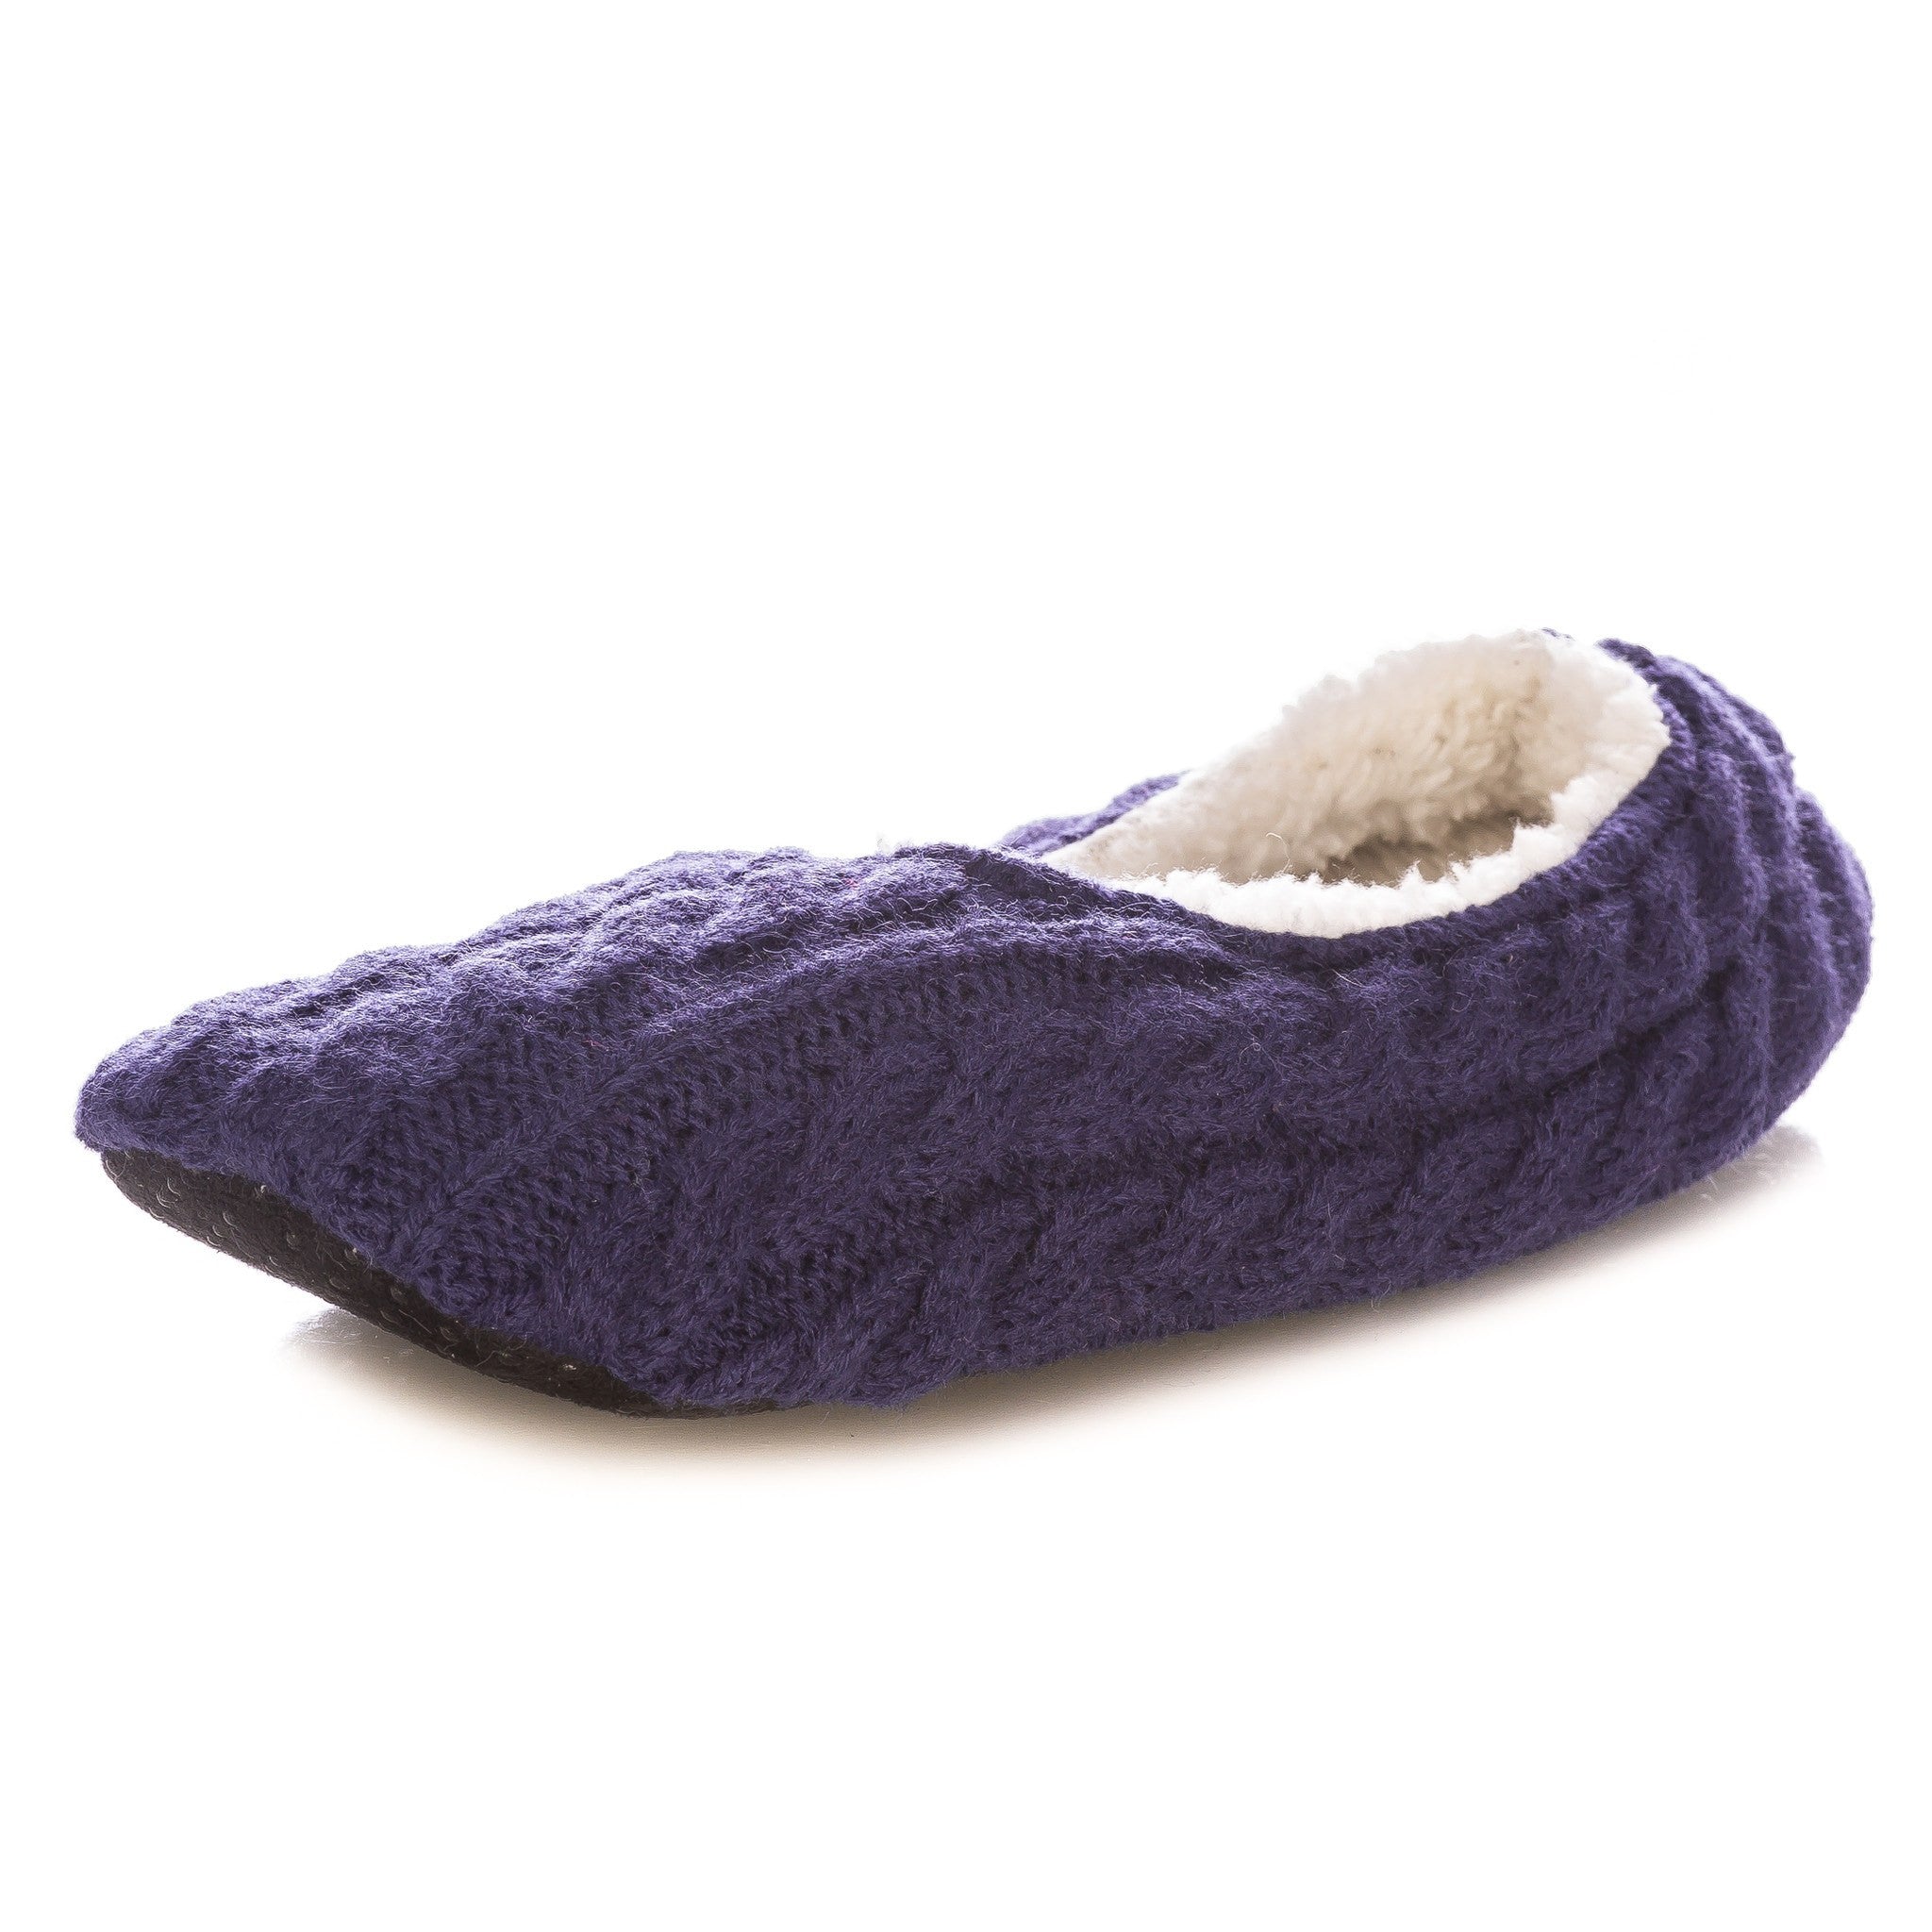 Women's Cable Knit Indoor Ballet Slippers